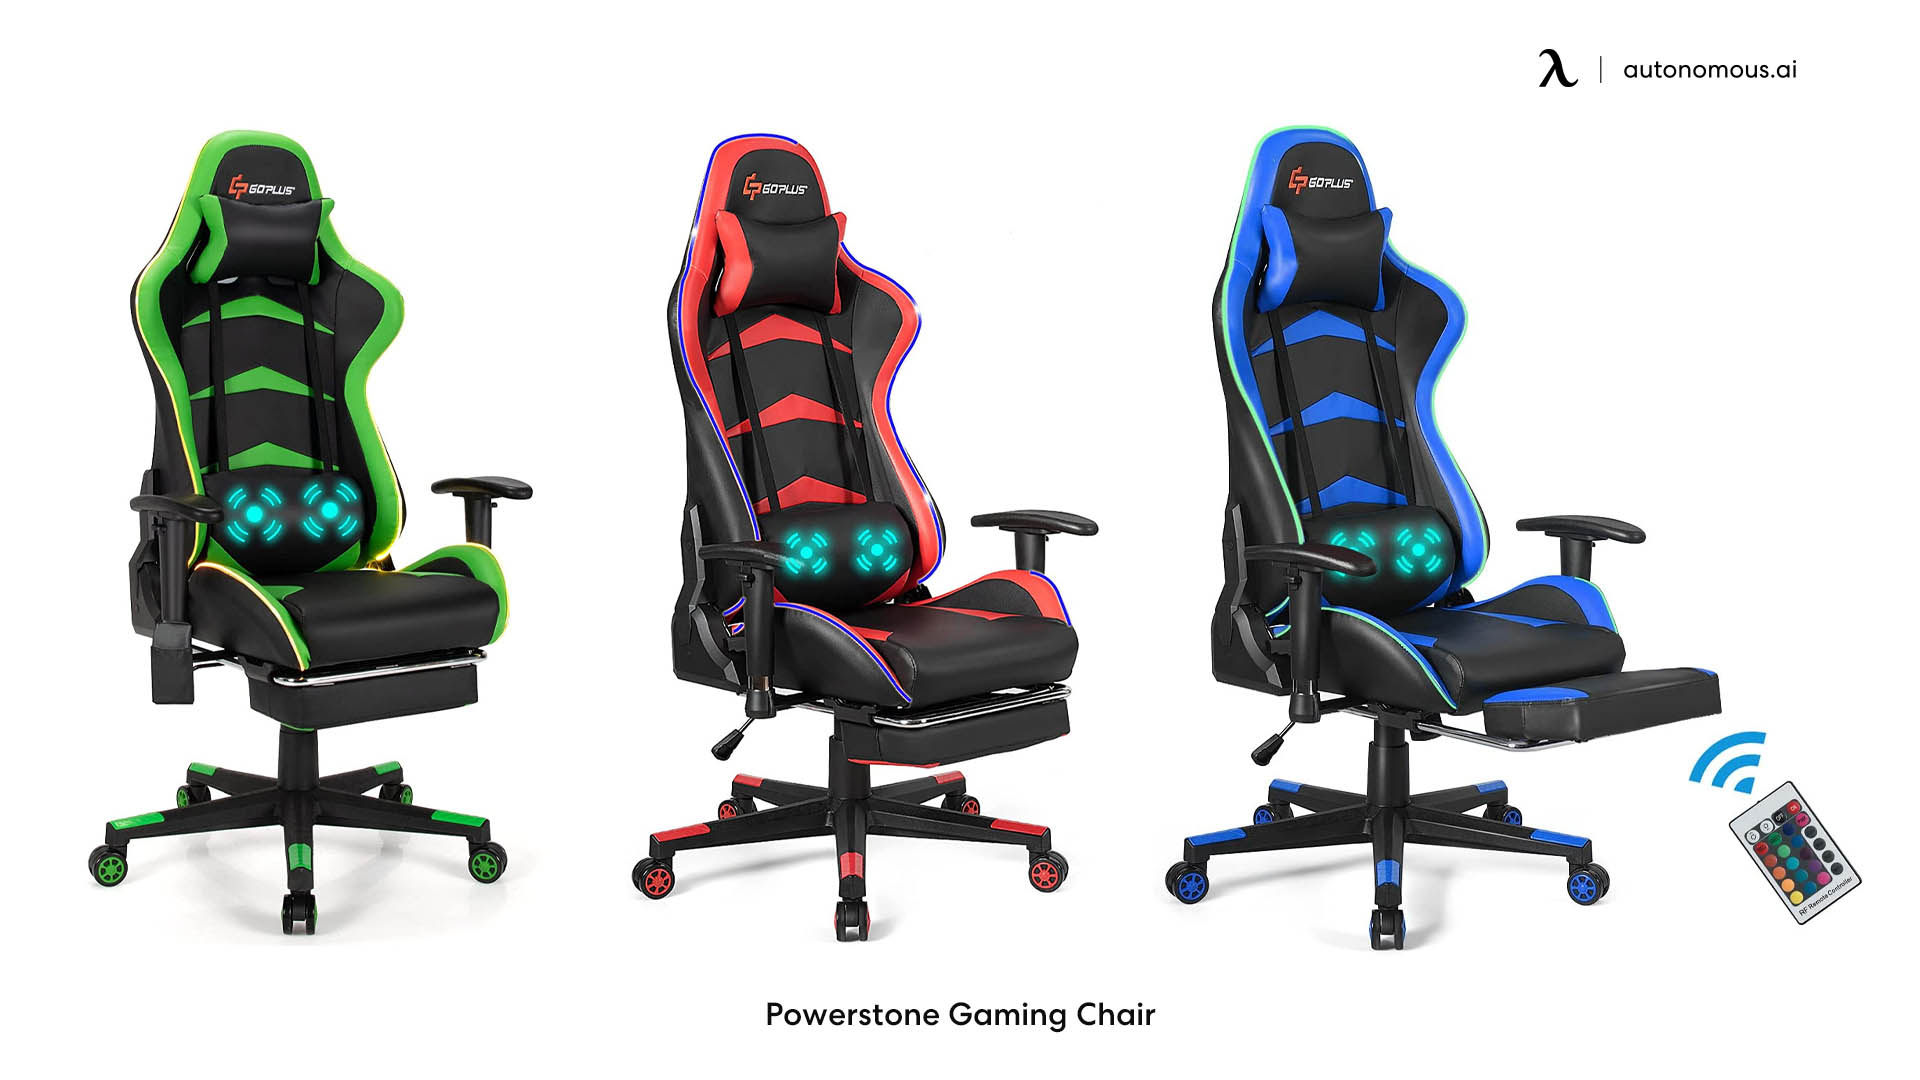 Powerstone led gaming chair